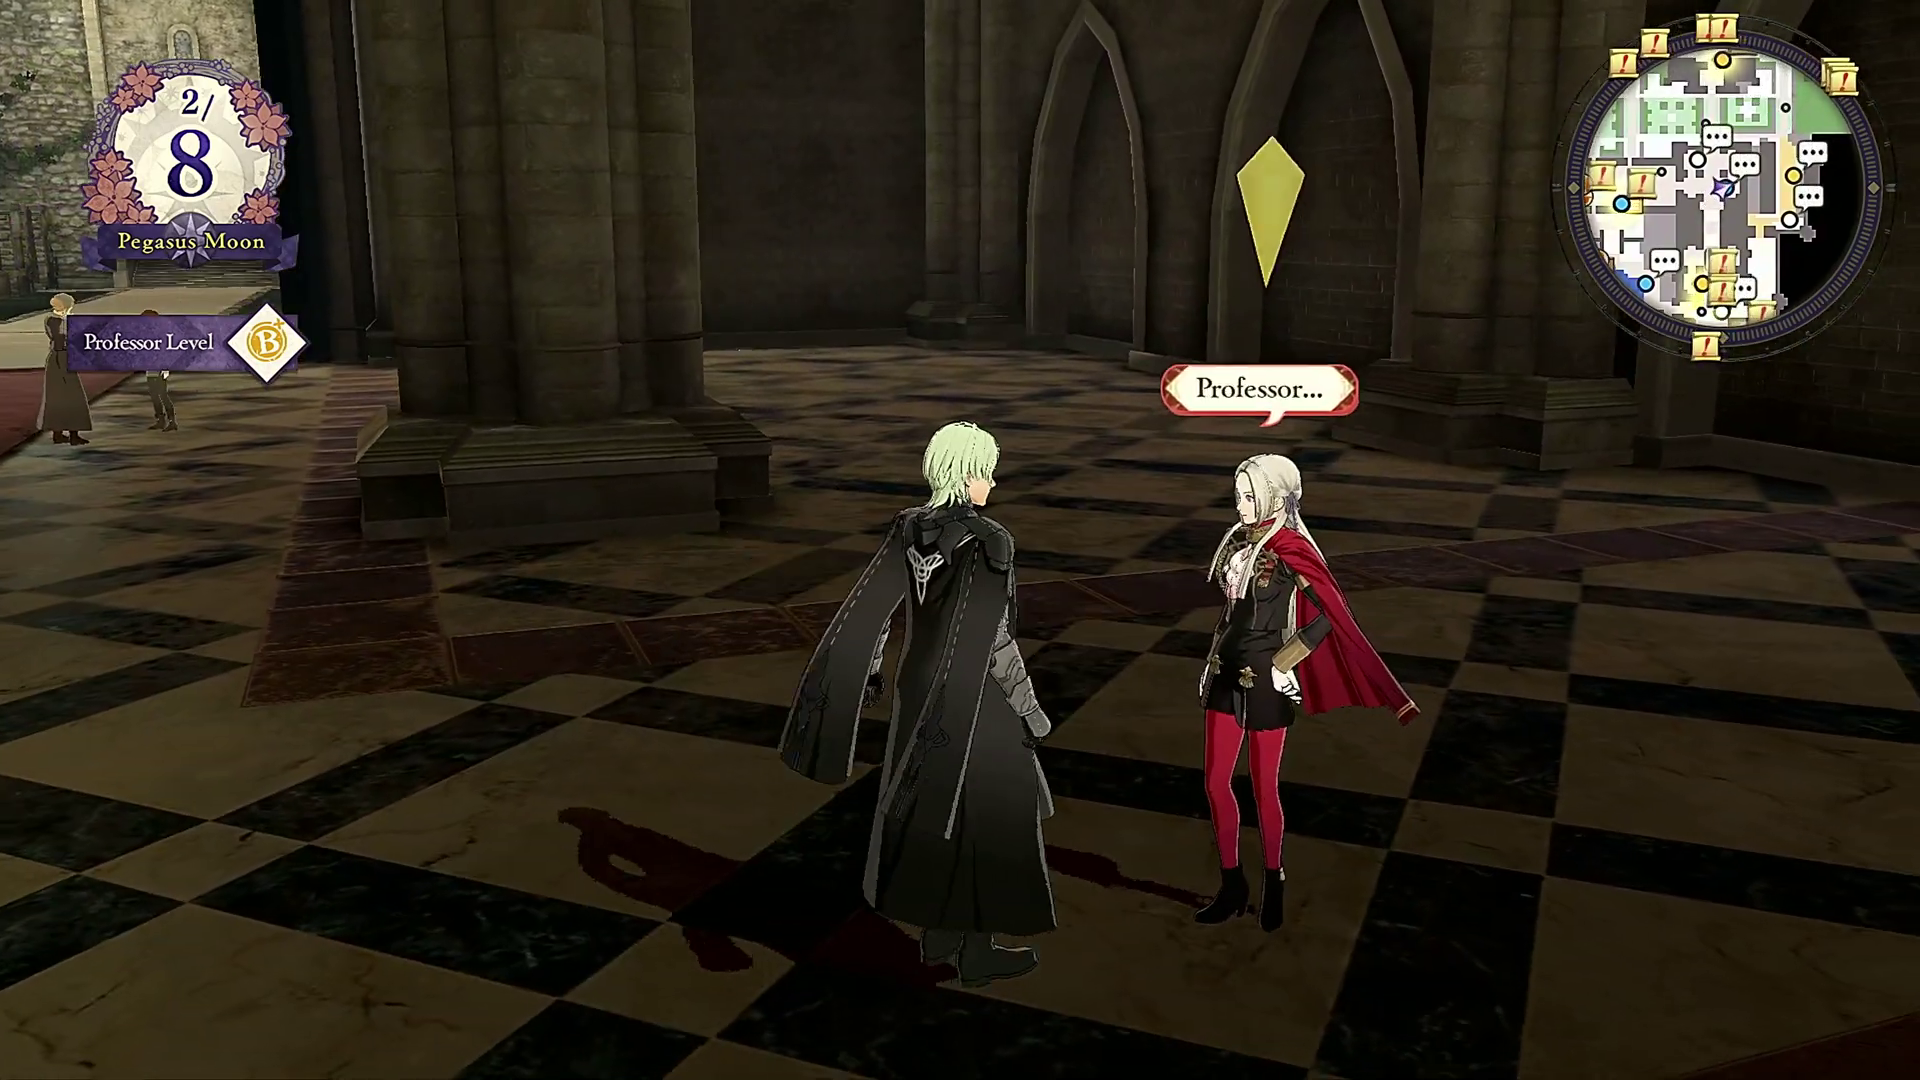 Fire Emblem Three Houses Fourth Route location